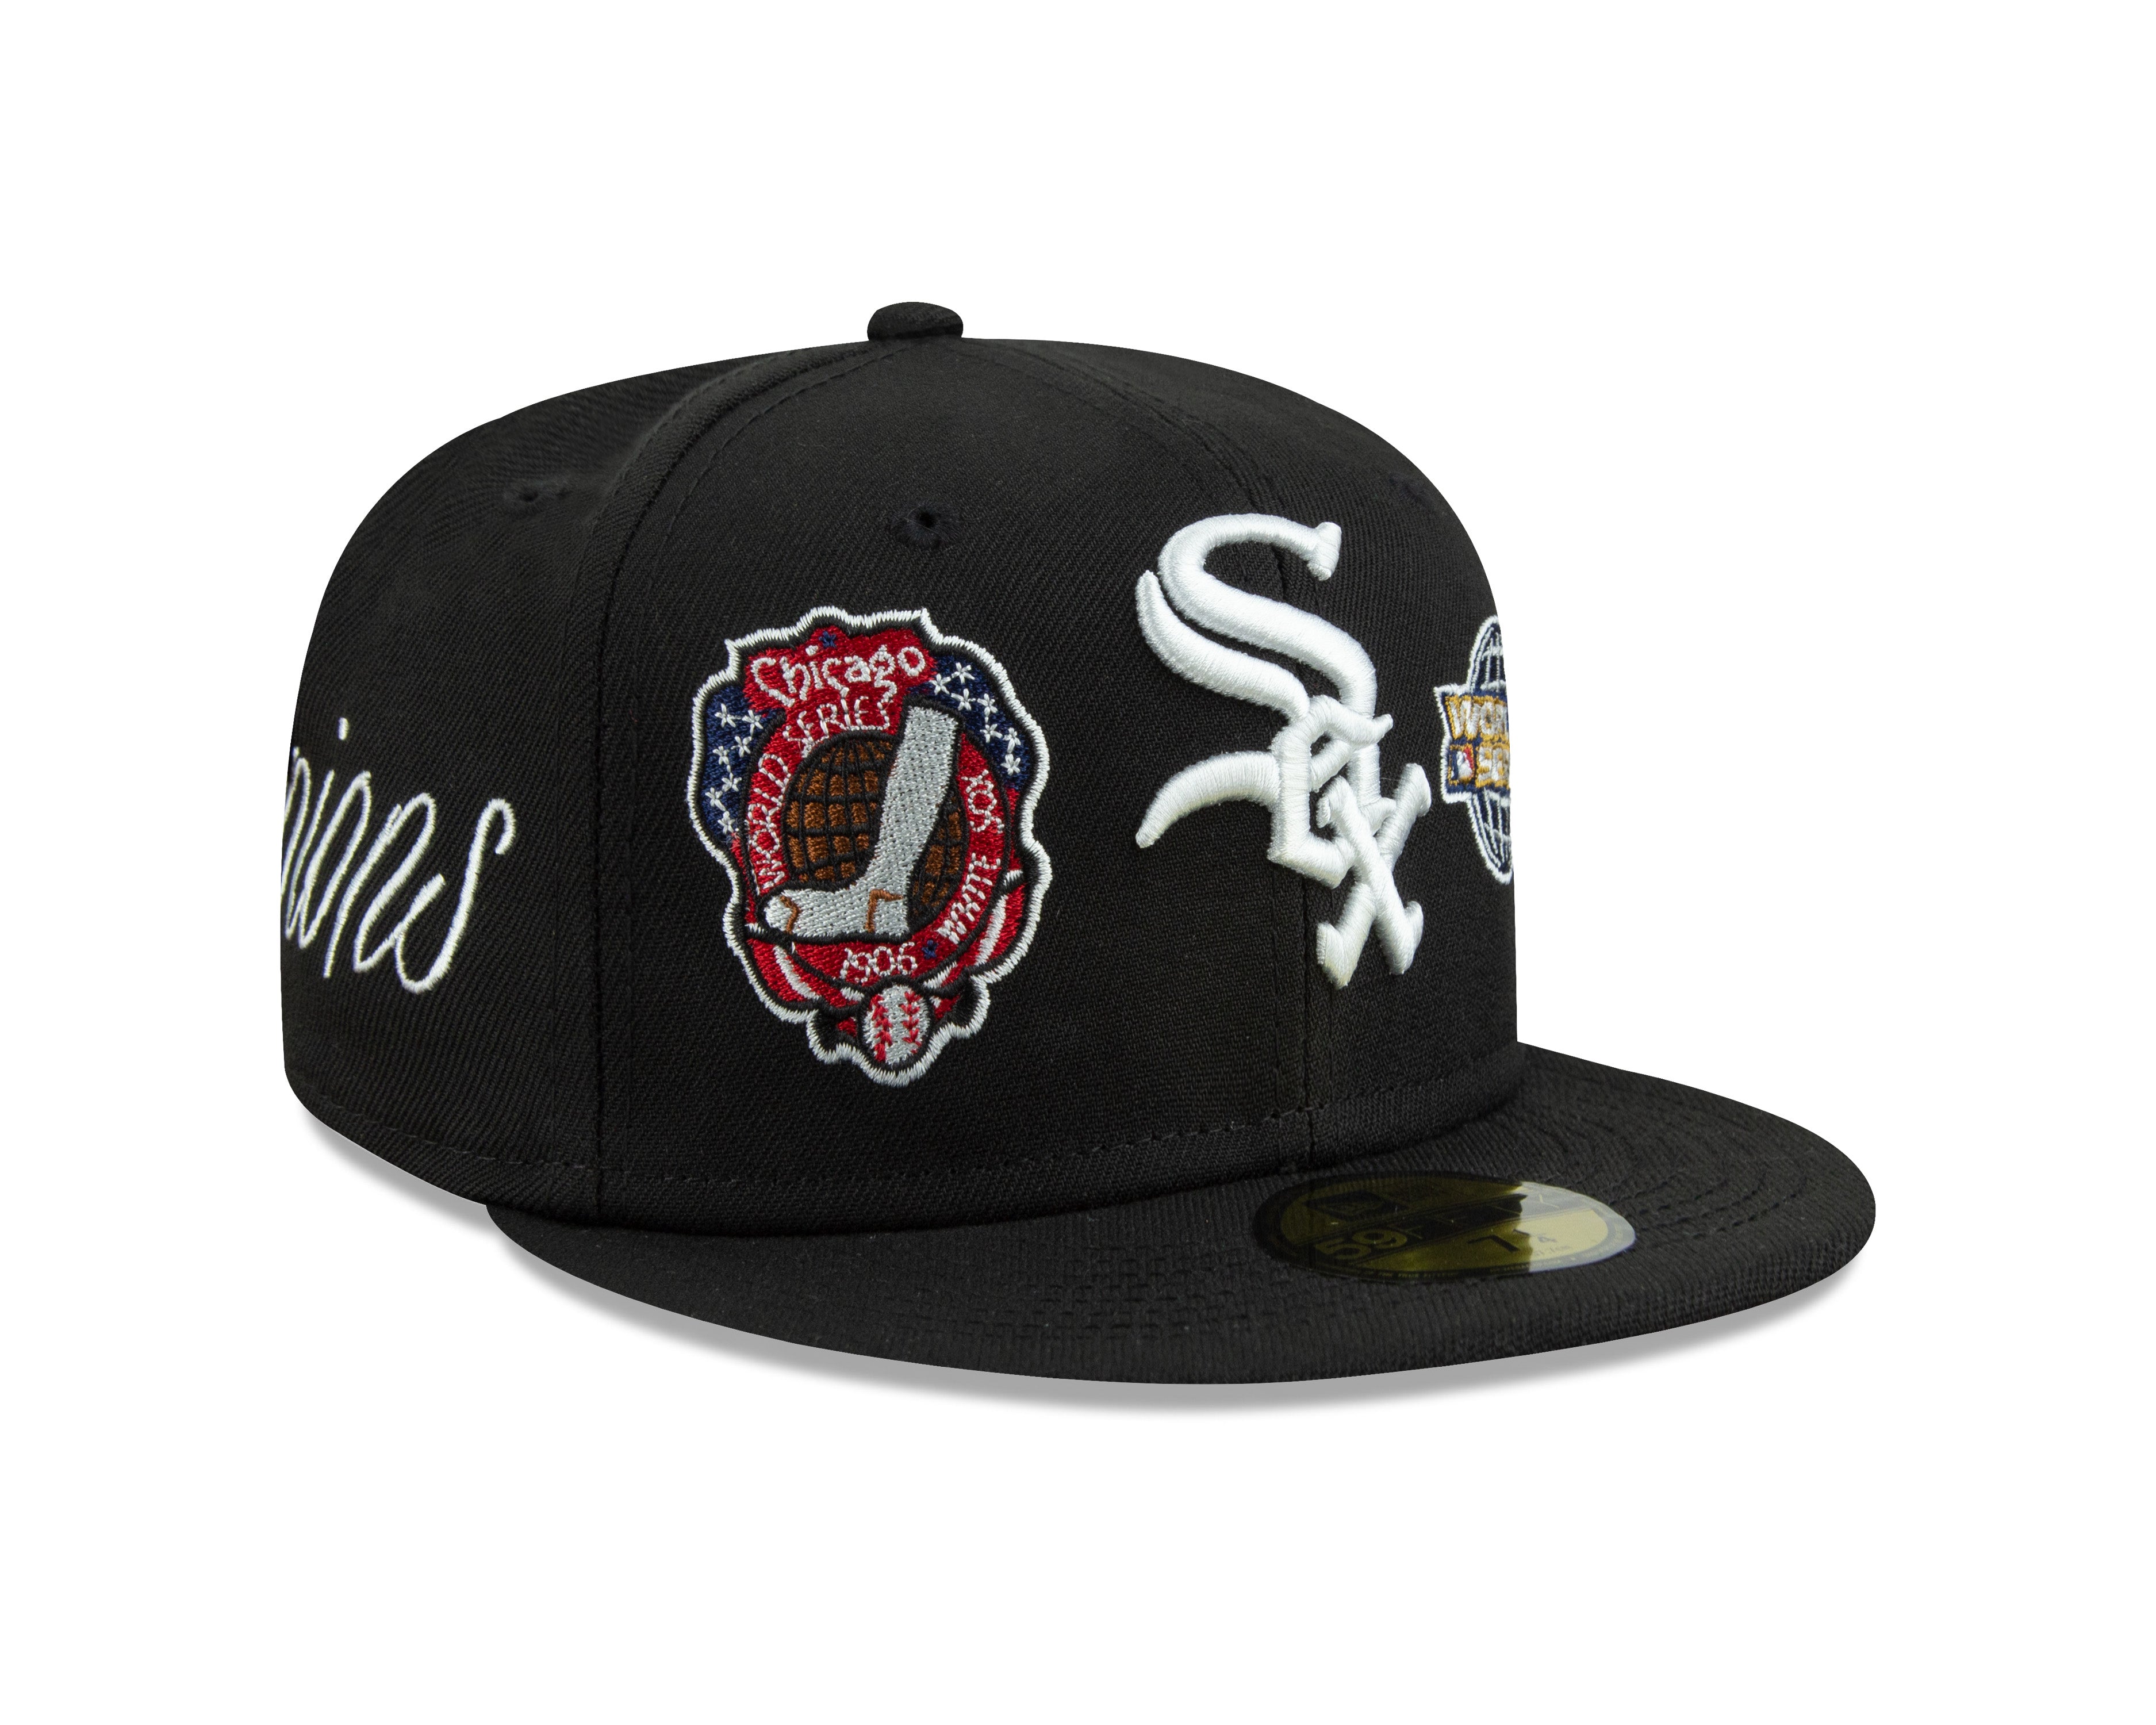 HISTORIC CHAMPS 59Fifty Fitted Cap Chicago White Sox - Black - Headz Up 